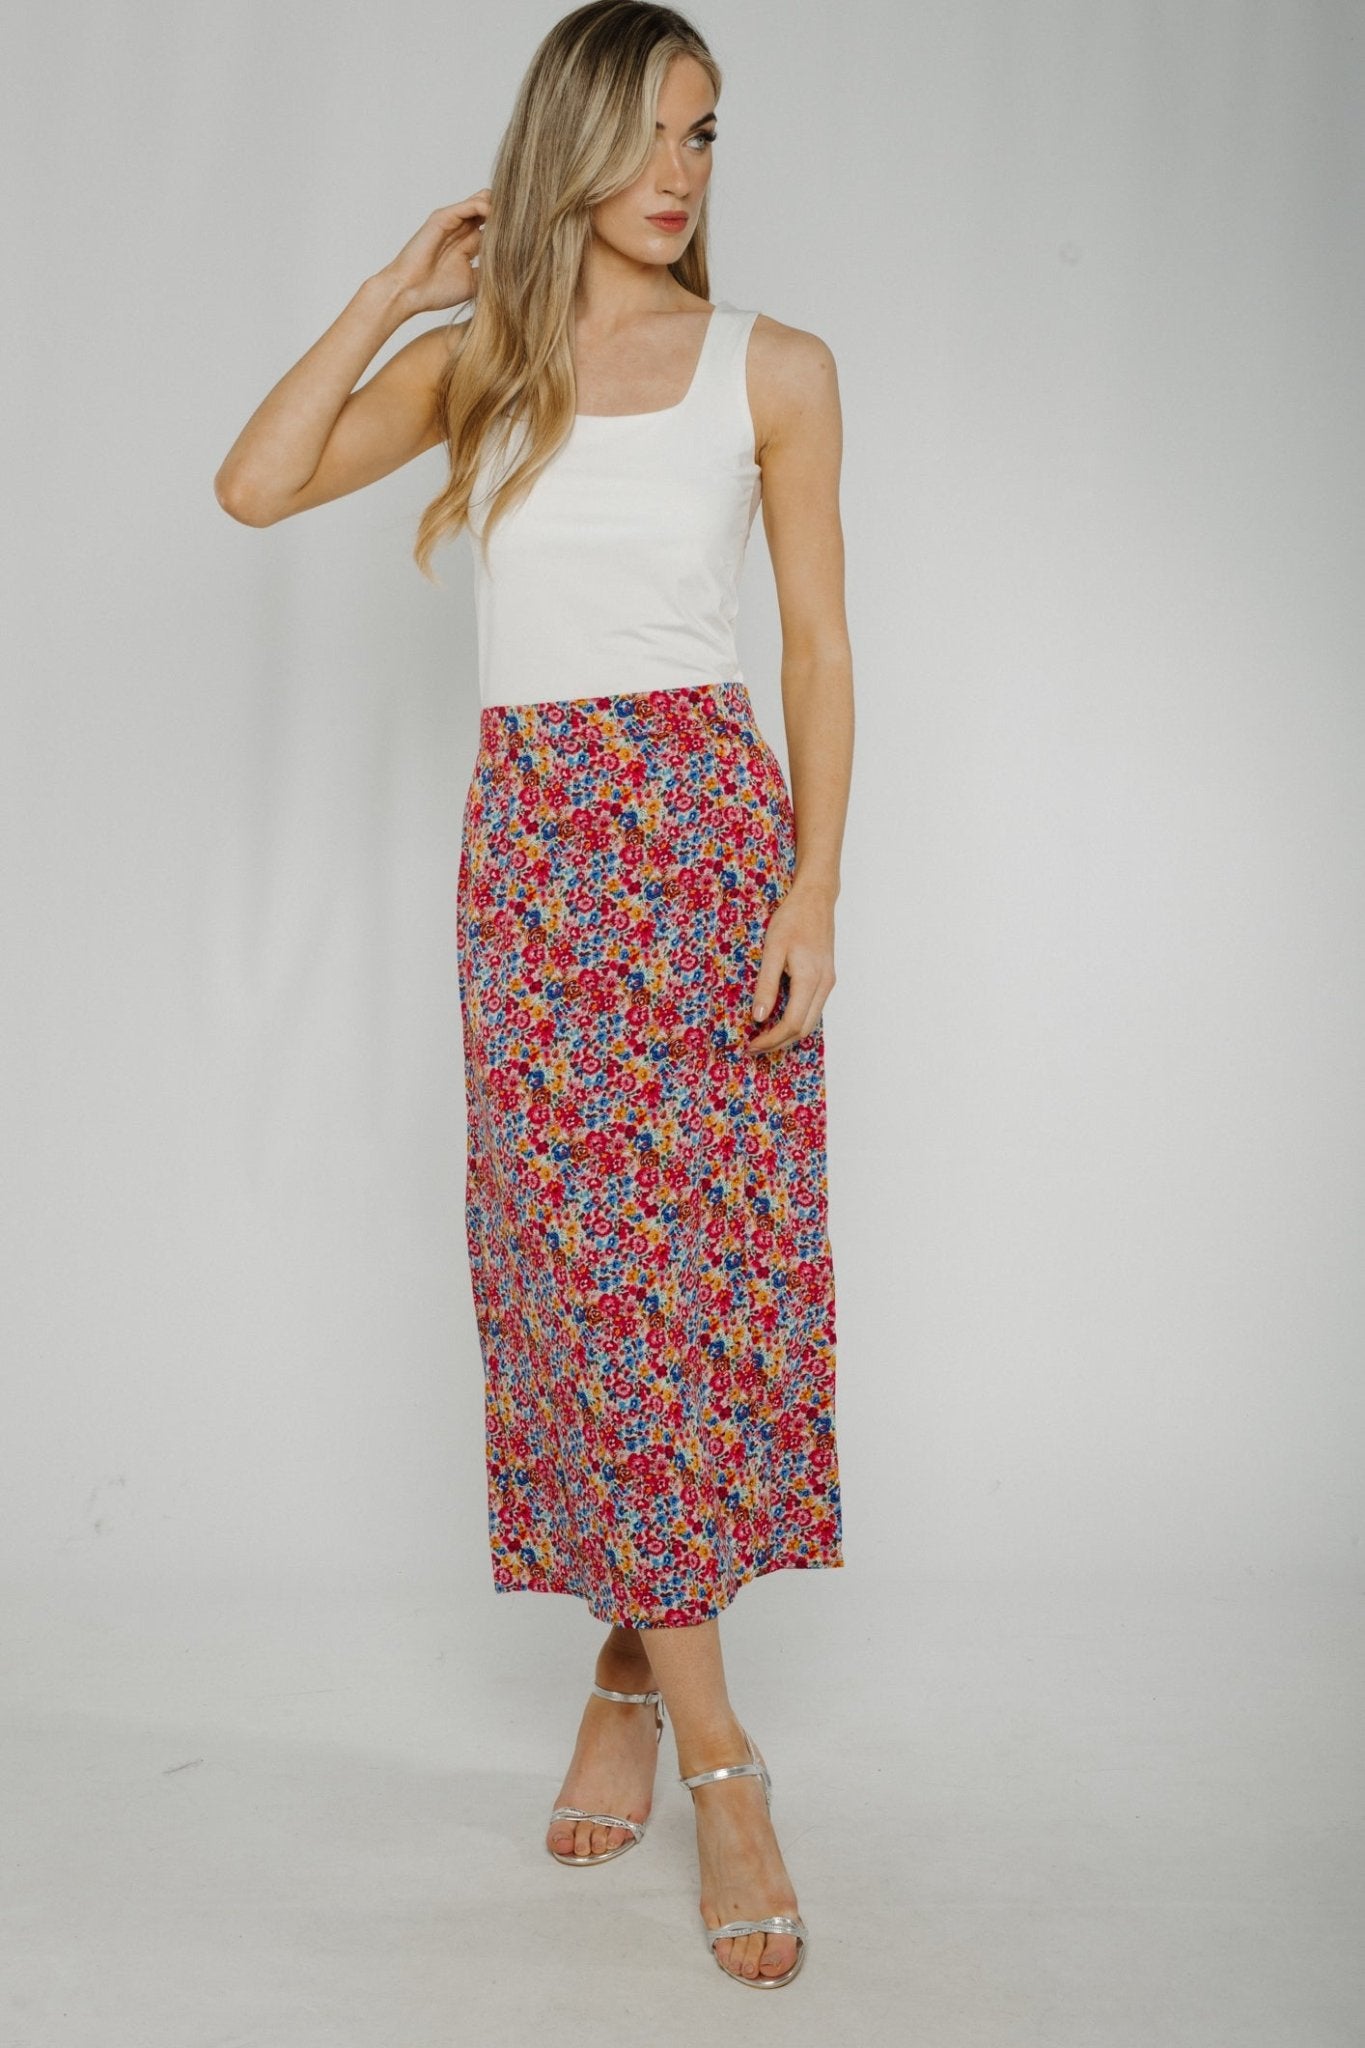 Ally Floral Slip Skirt In Red Mix - The Walk in Wardrobe